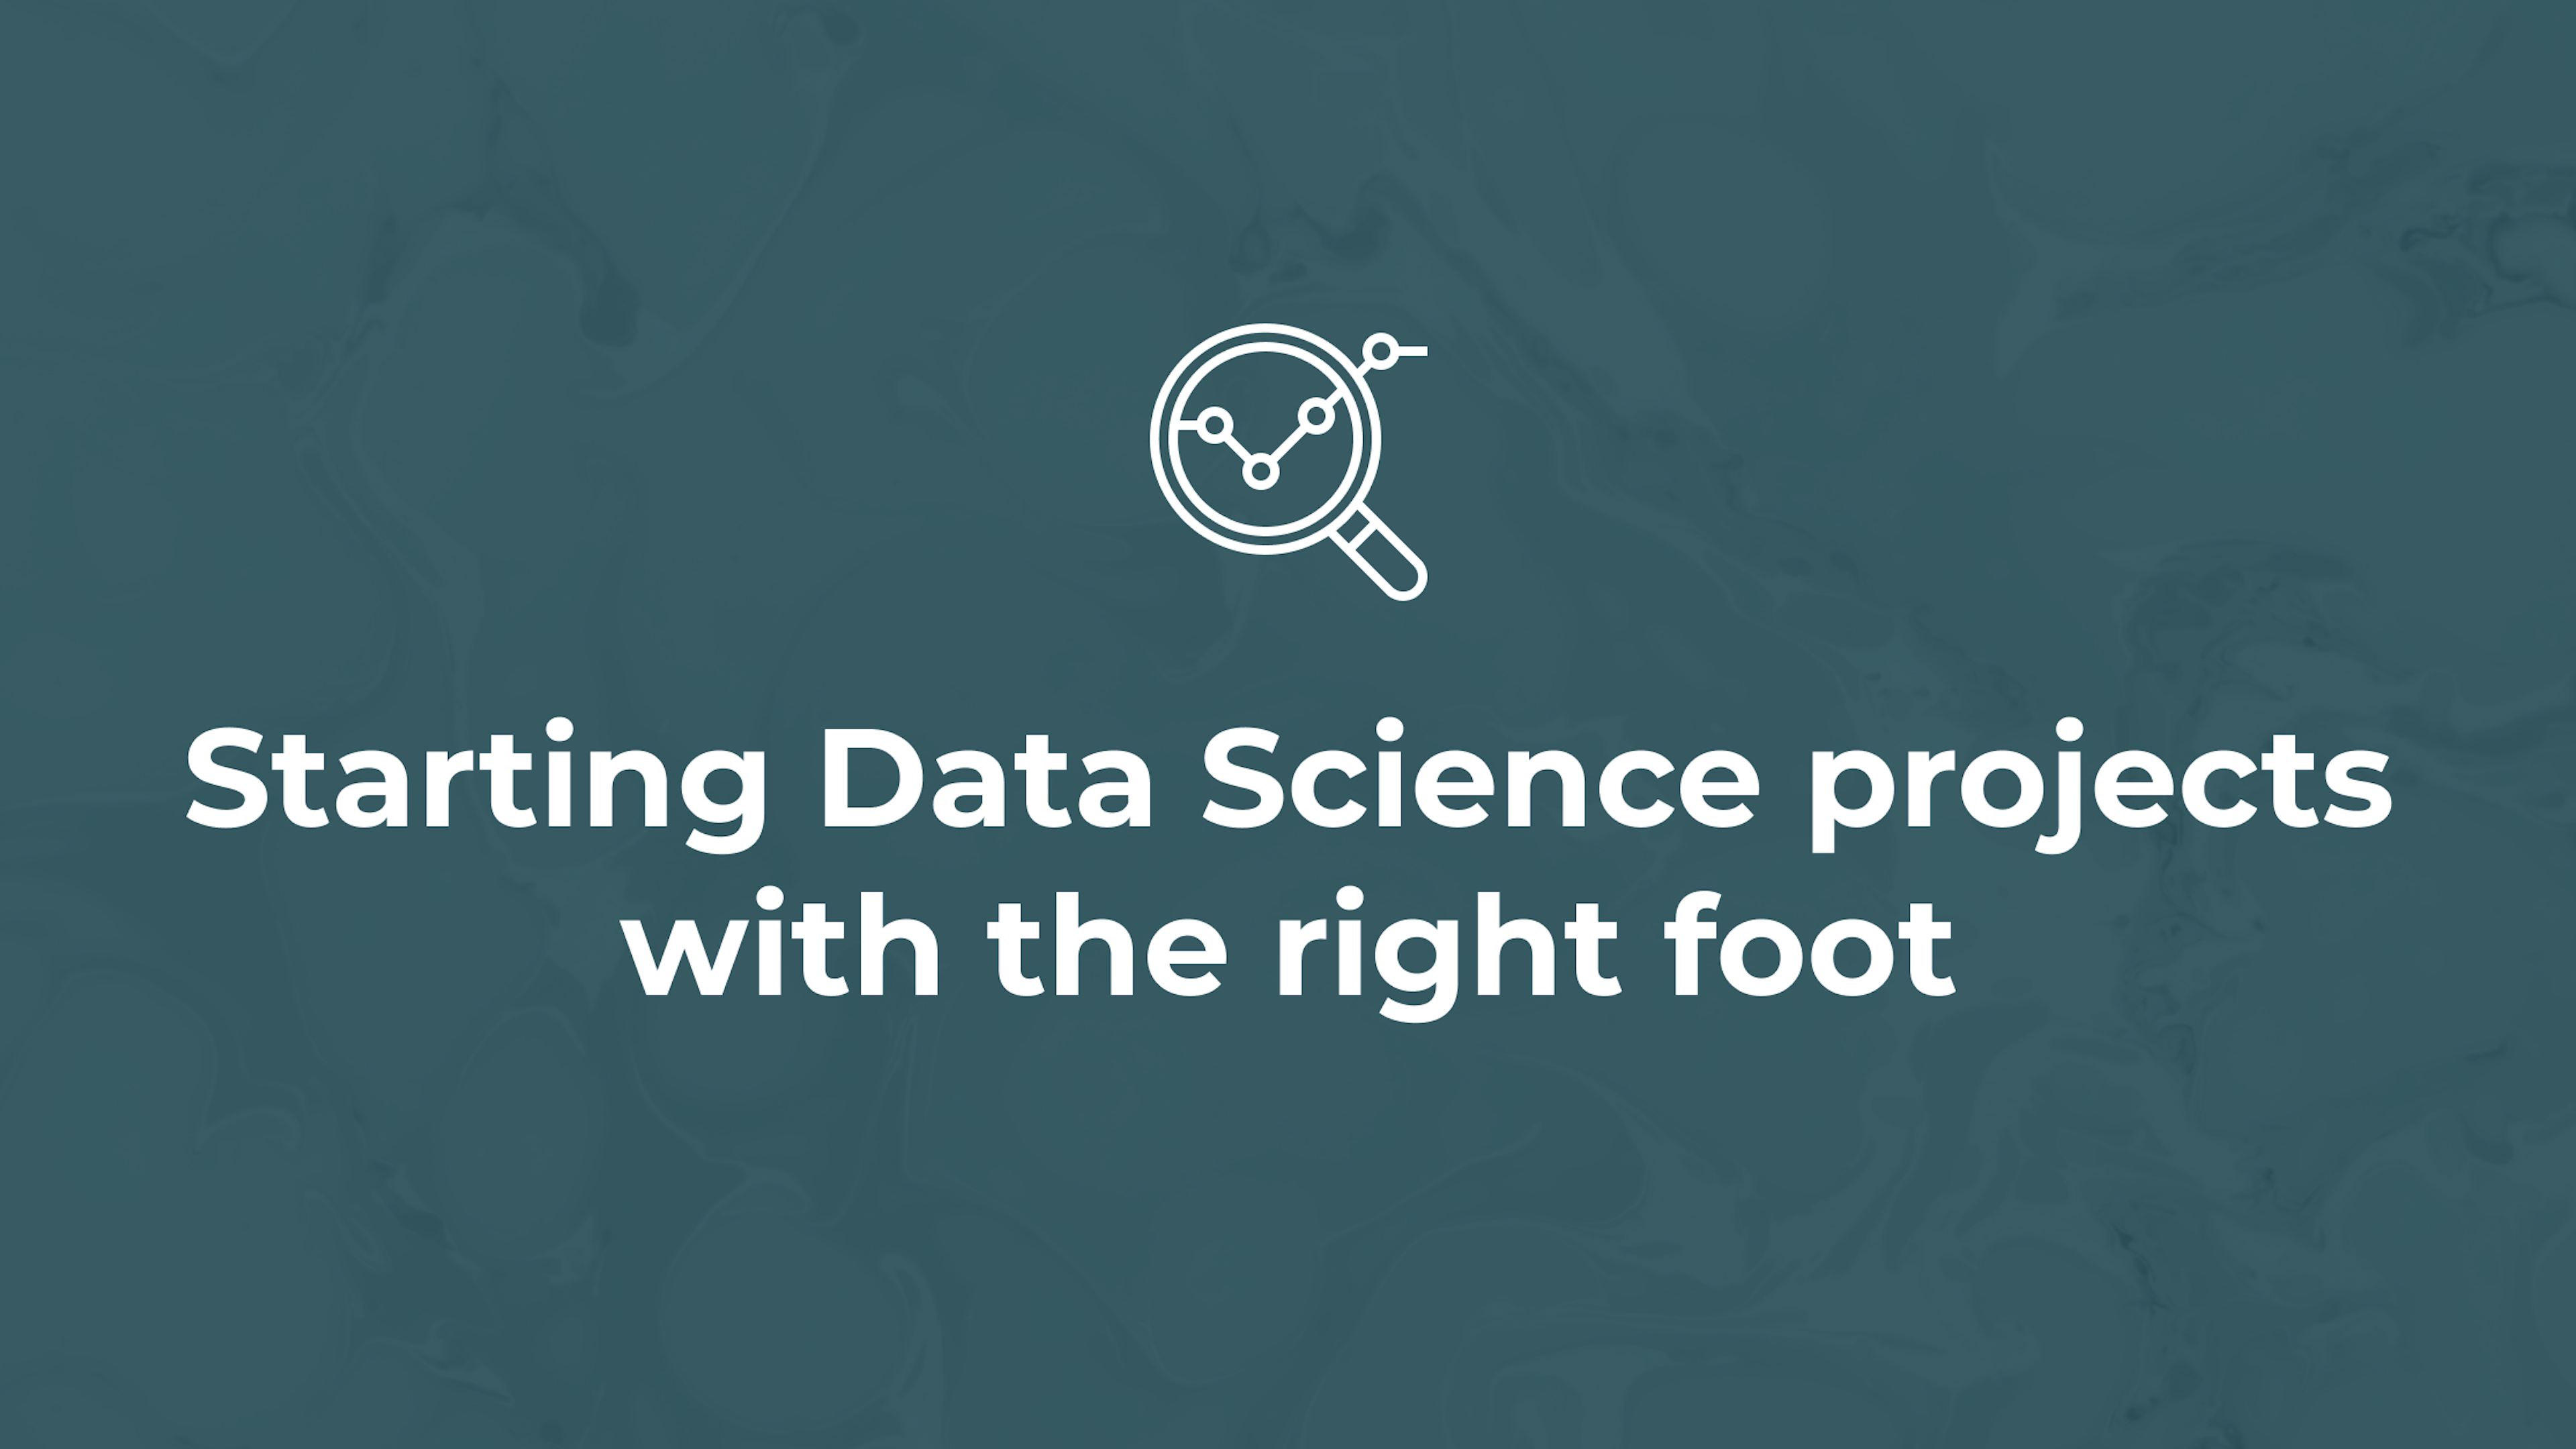 Starting Data Science projects with the right foot